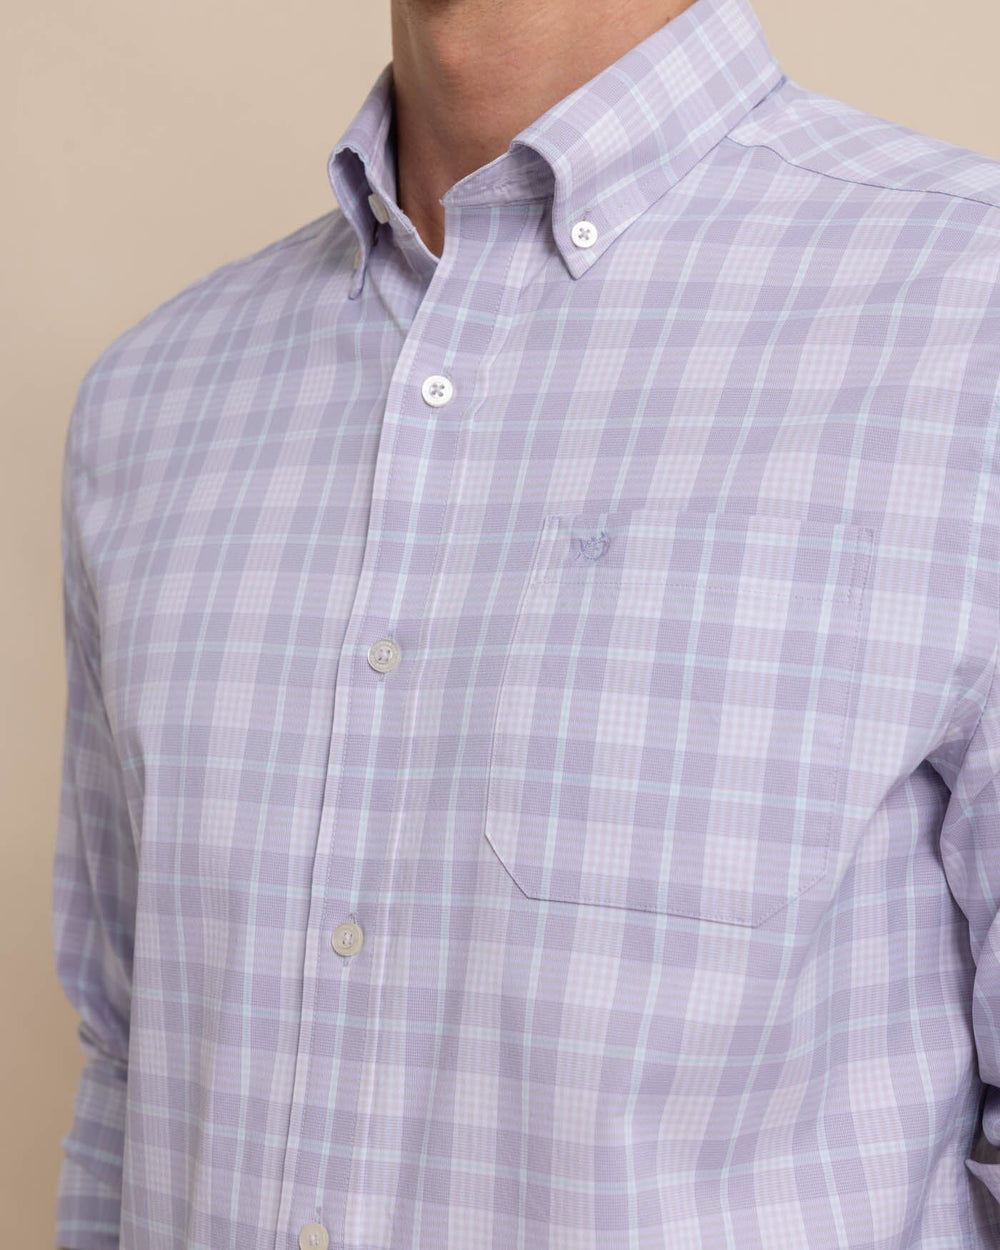 The detail view of the Southern Tide Intercoastal Primrose Plaid Long Sleeve Sport Shirt by Southern Tide - Orchid Petal